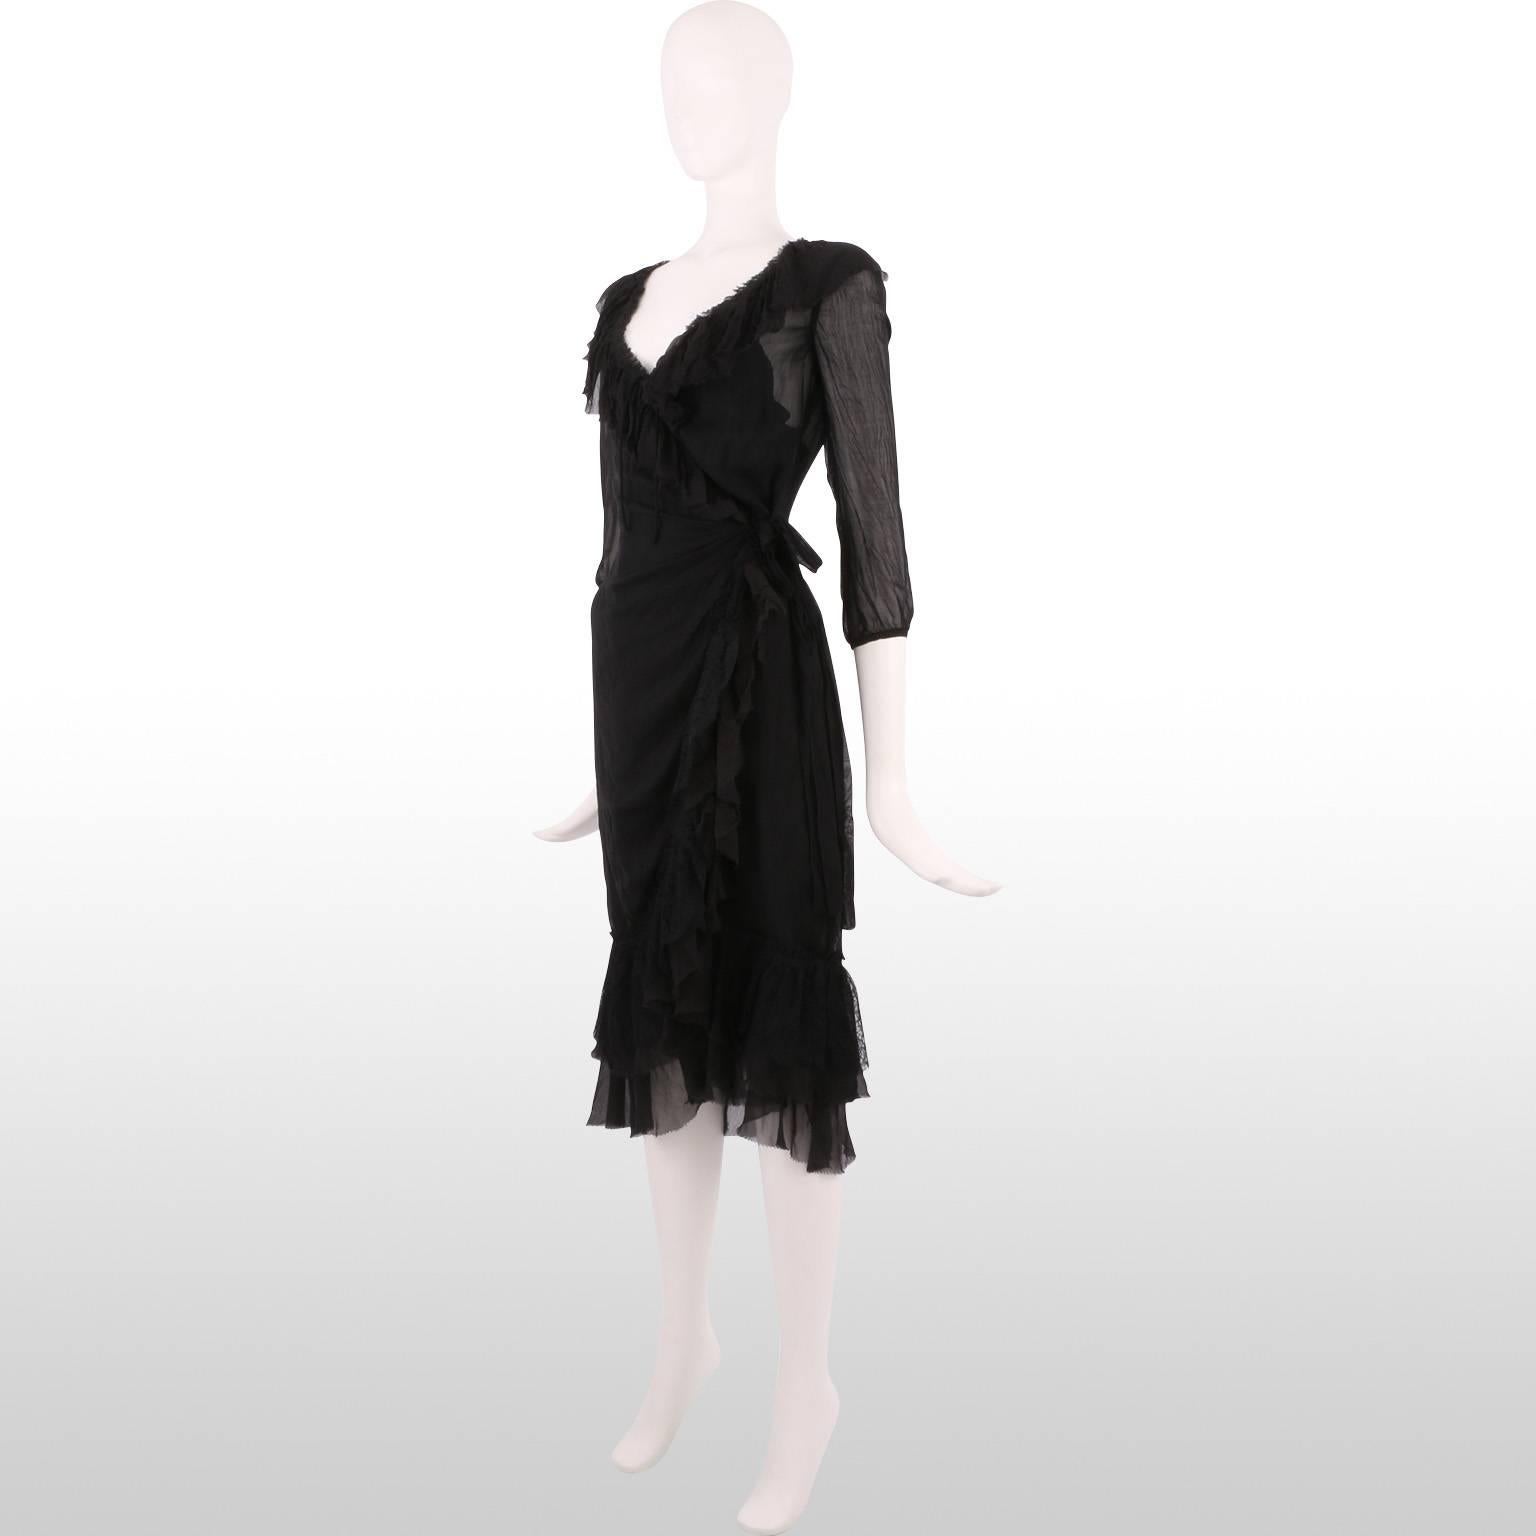 Prada Black Silk Overlay Dress with Lace For Sale 1